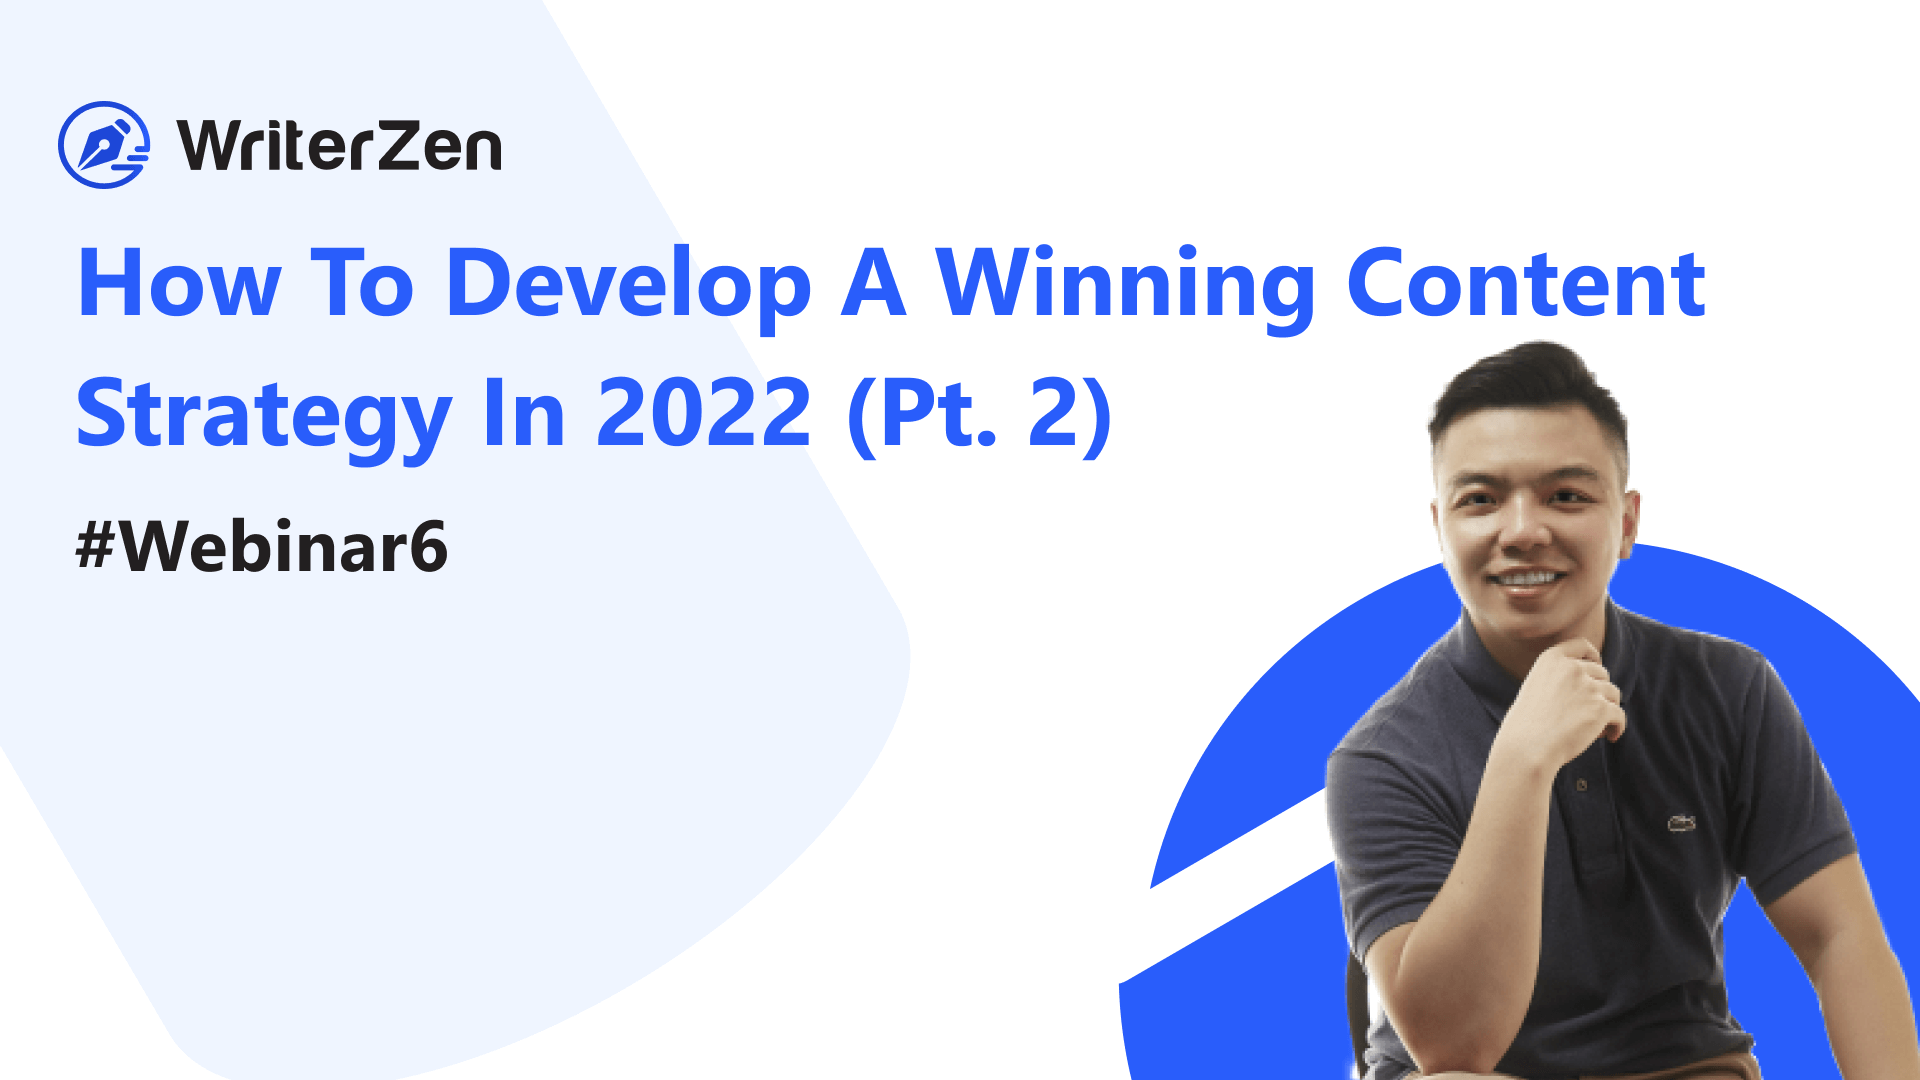 How To Develop A Winning Content Strategy In 2022 (Pt. 2)